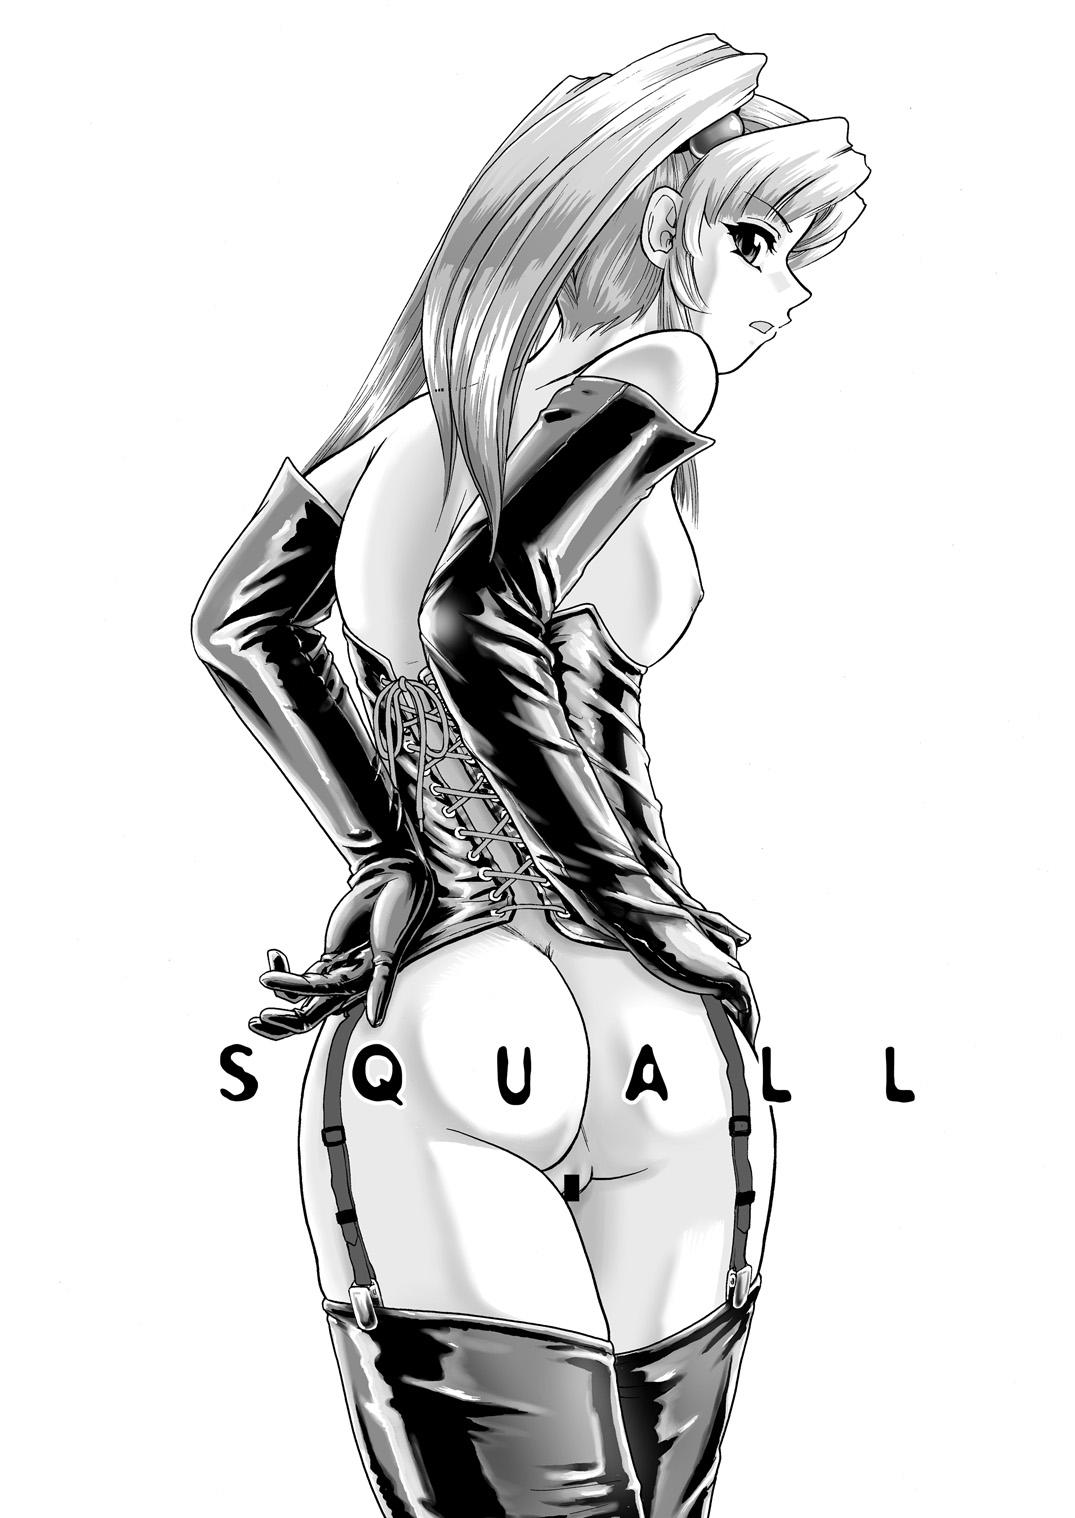 SQUALL 1